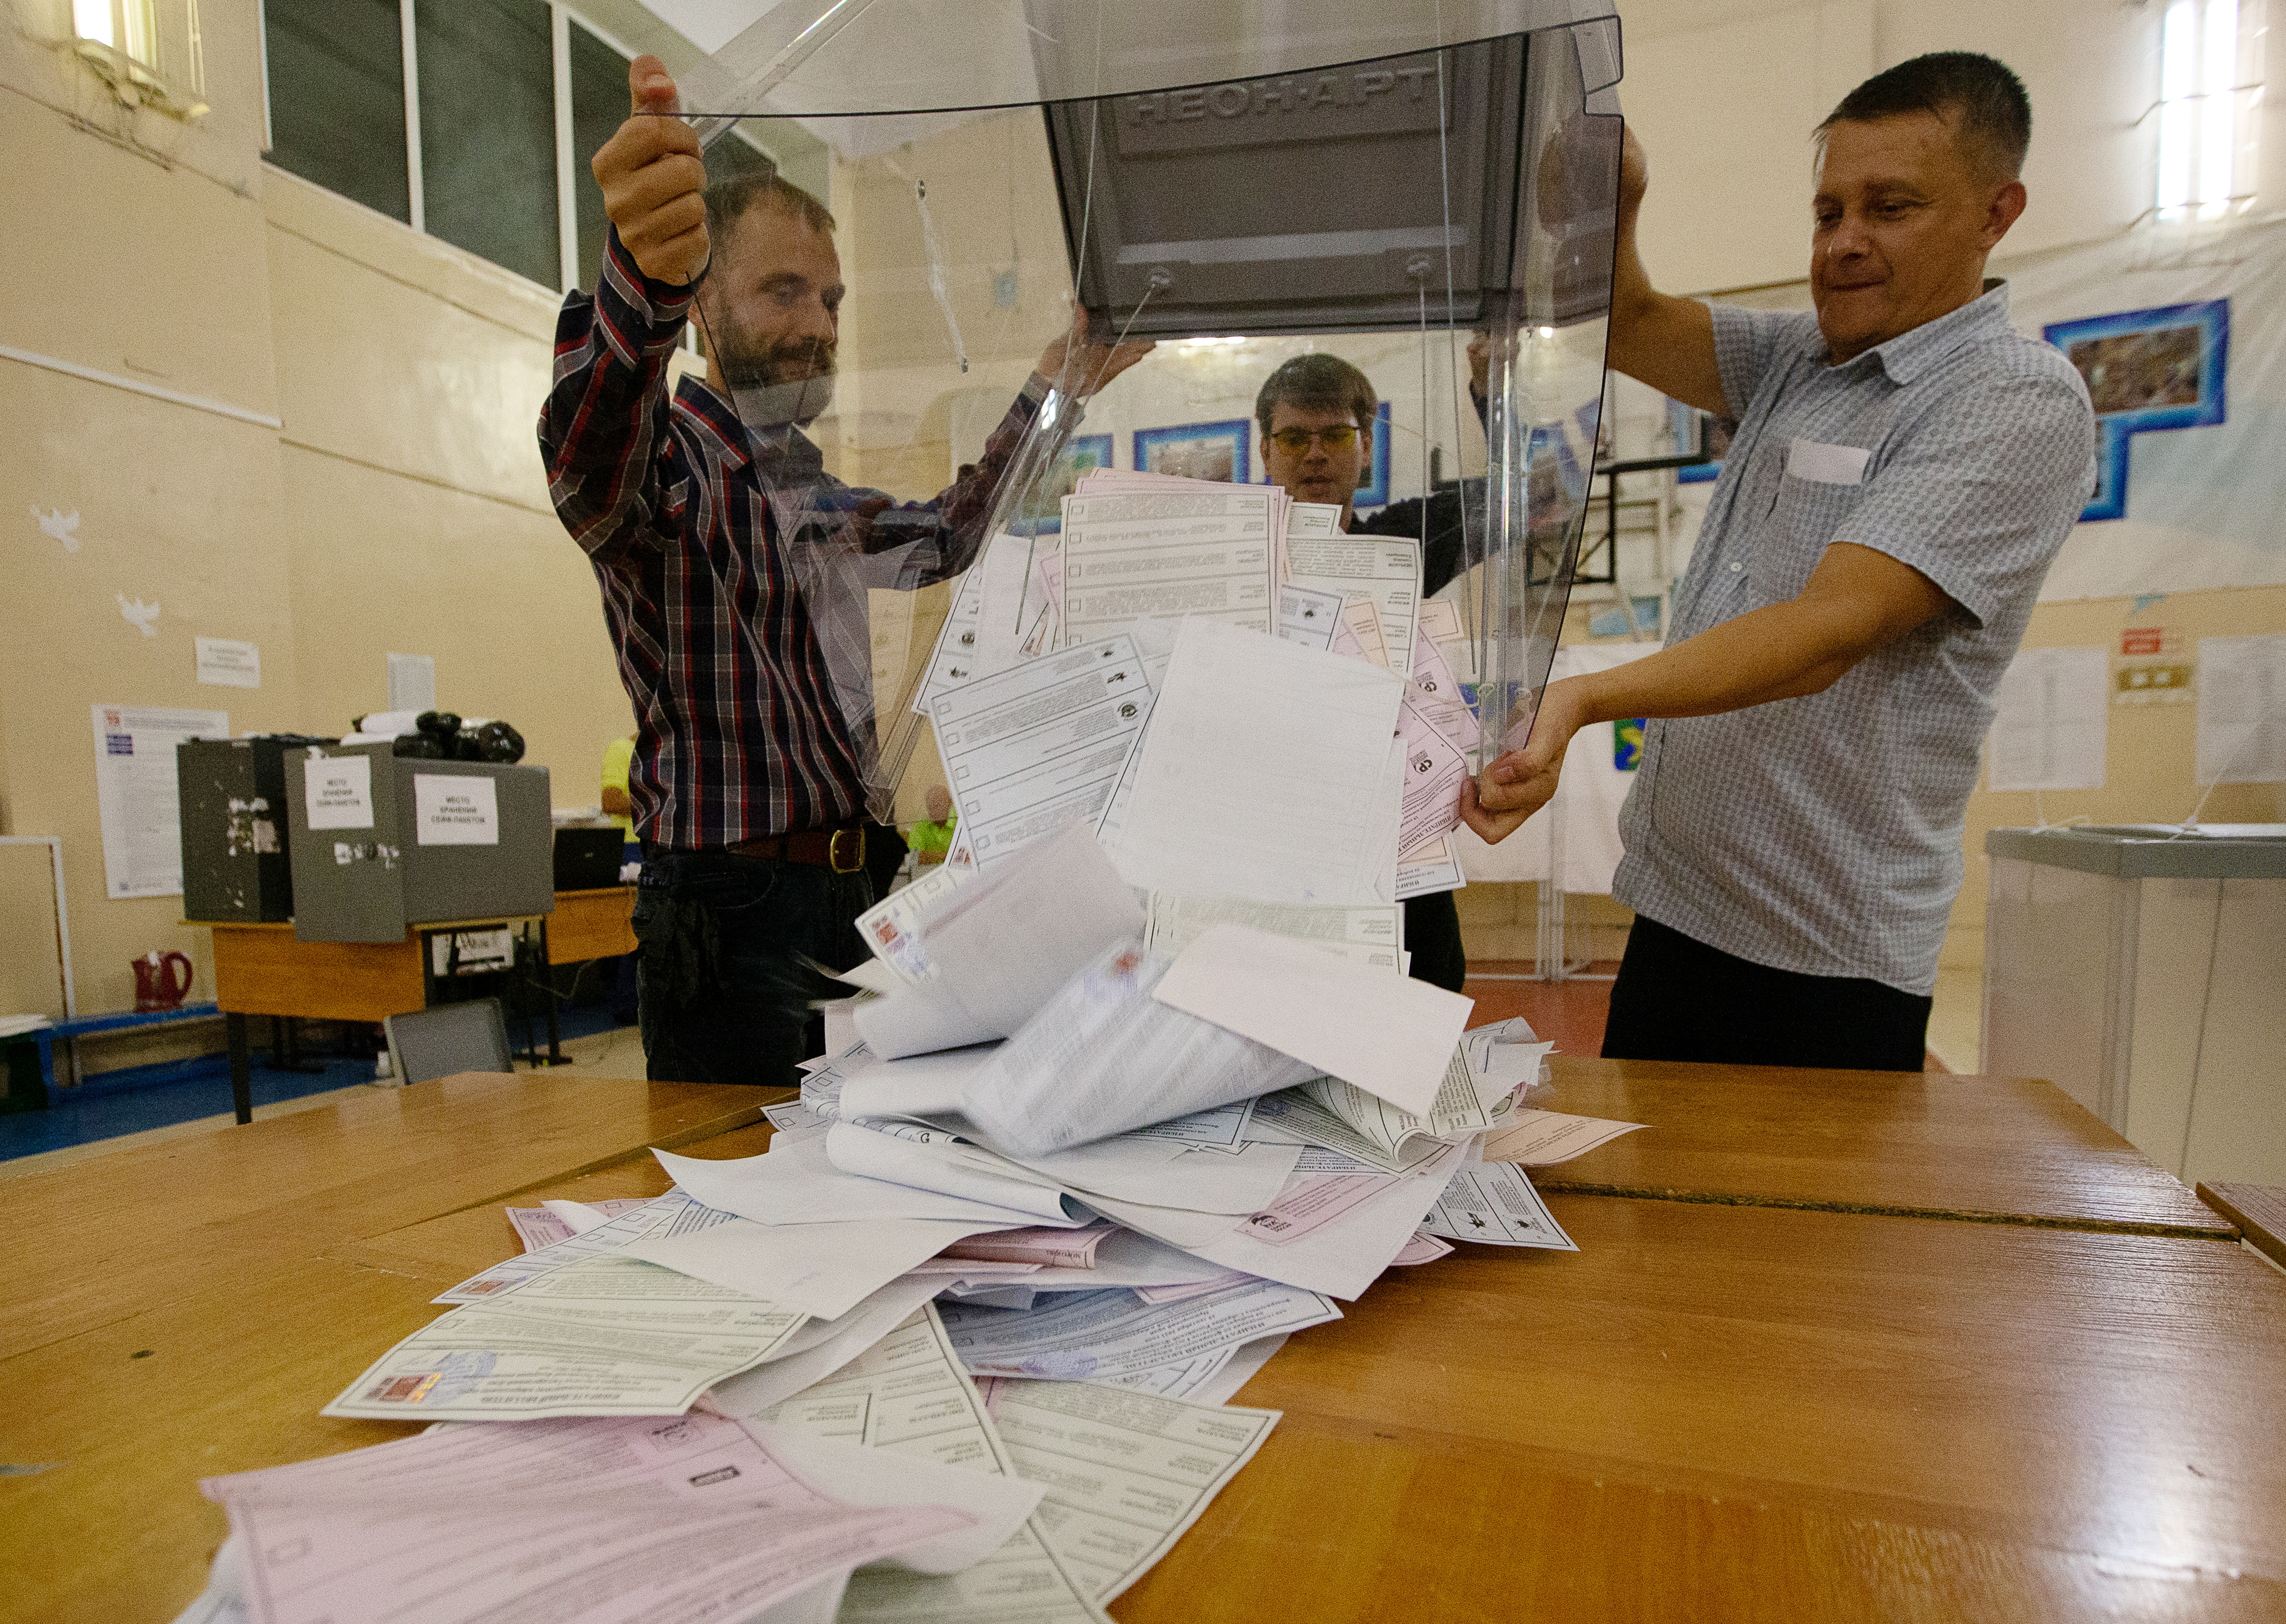 Members of a local election commission empty a ballot box before starting to count votes during a three-day parliamentary election in the far eastern city of Vladivostok, Russia September 19, 2021. REUTERS/Tatiana Meel NO RESALES. NO ARCHIVES